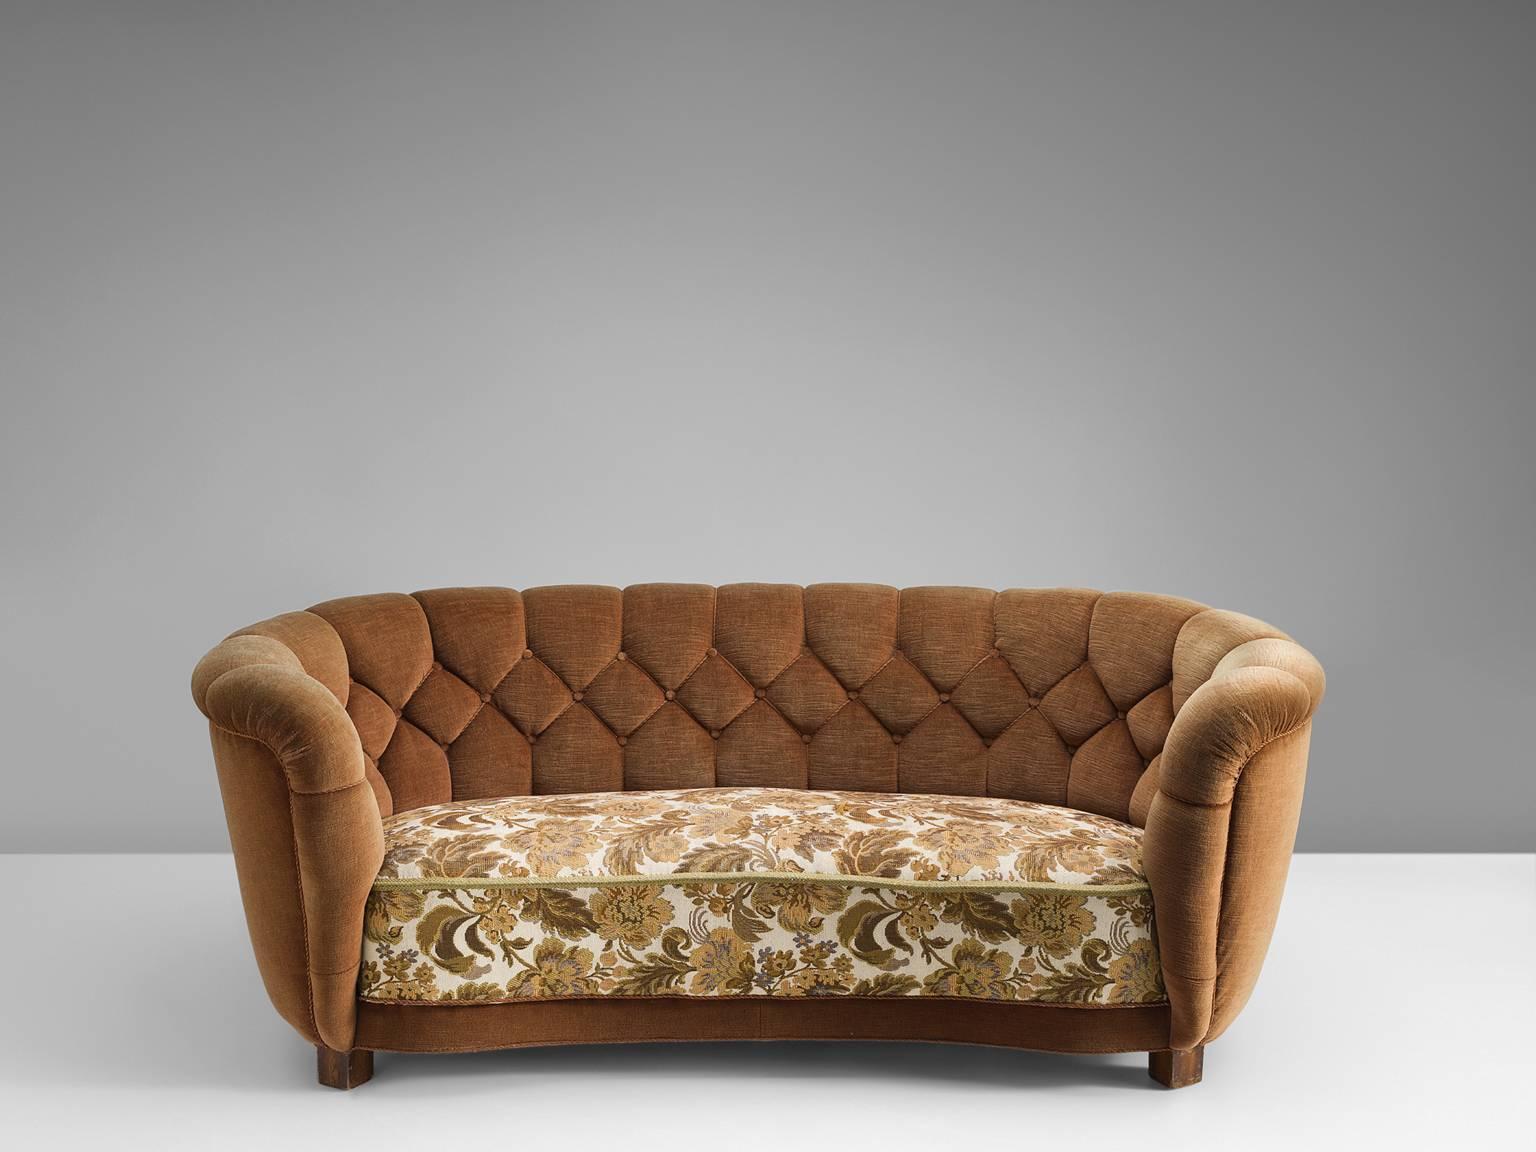 Sofa, fabric, wood, Denmark, 1950s.

This curved little sofa is well designed and proportioned. The thick seat and voluptuous quilted back are there to provide maximum comfort. The sofa is large in appearance but not in size. The original upholstery